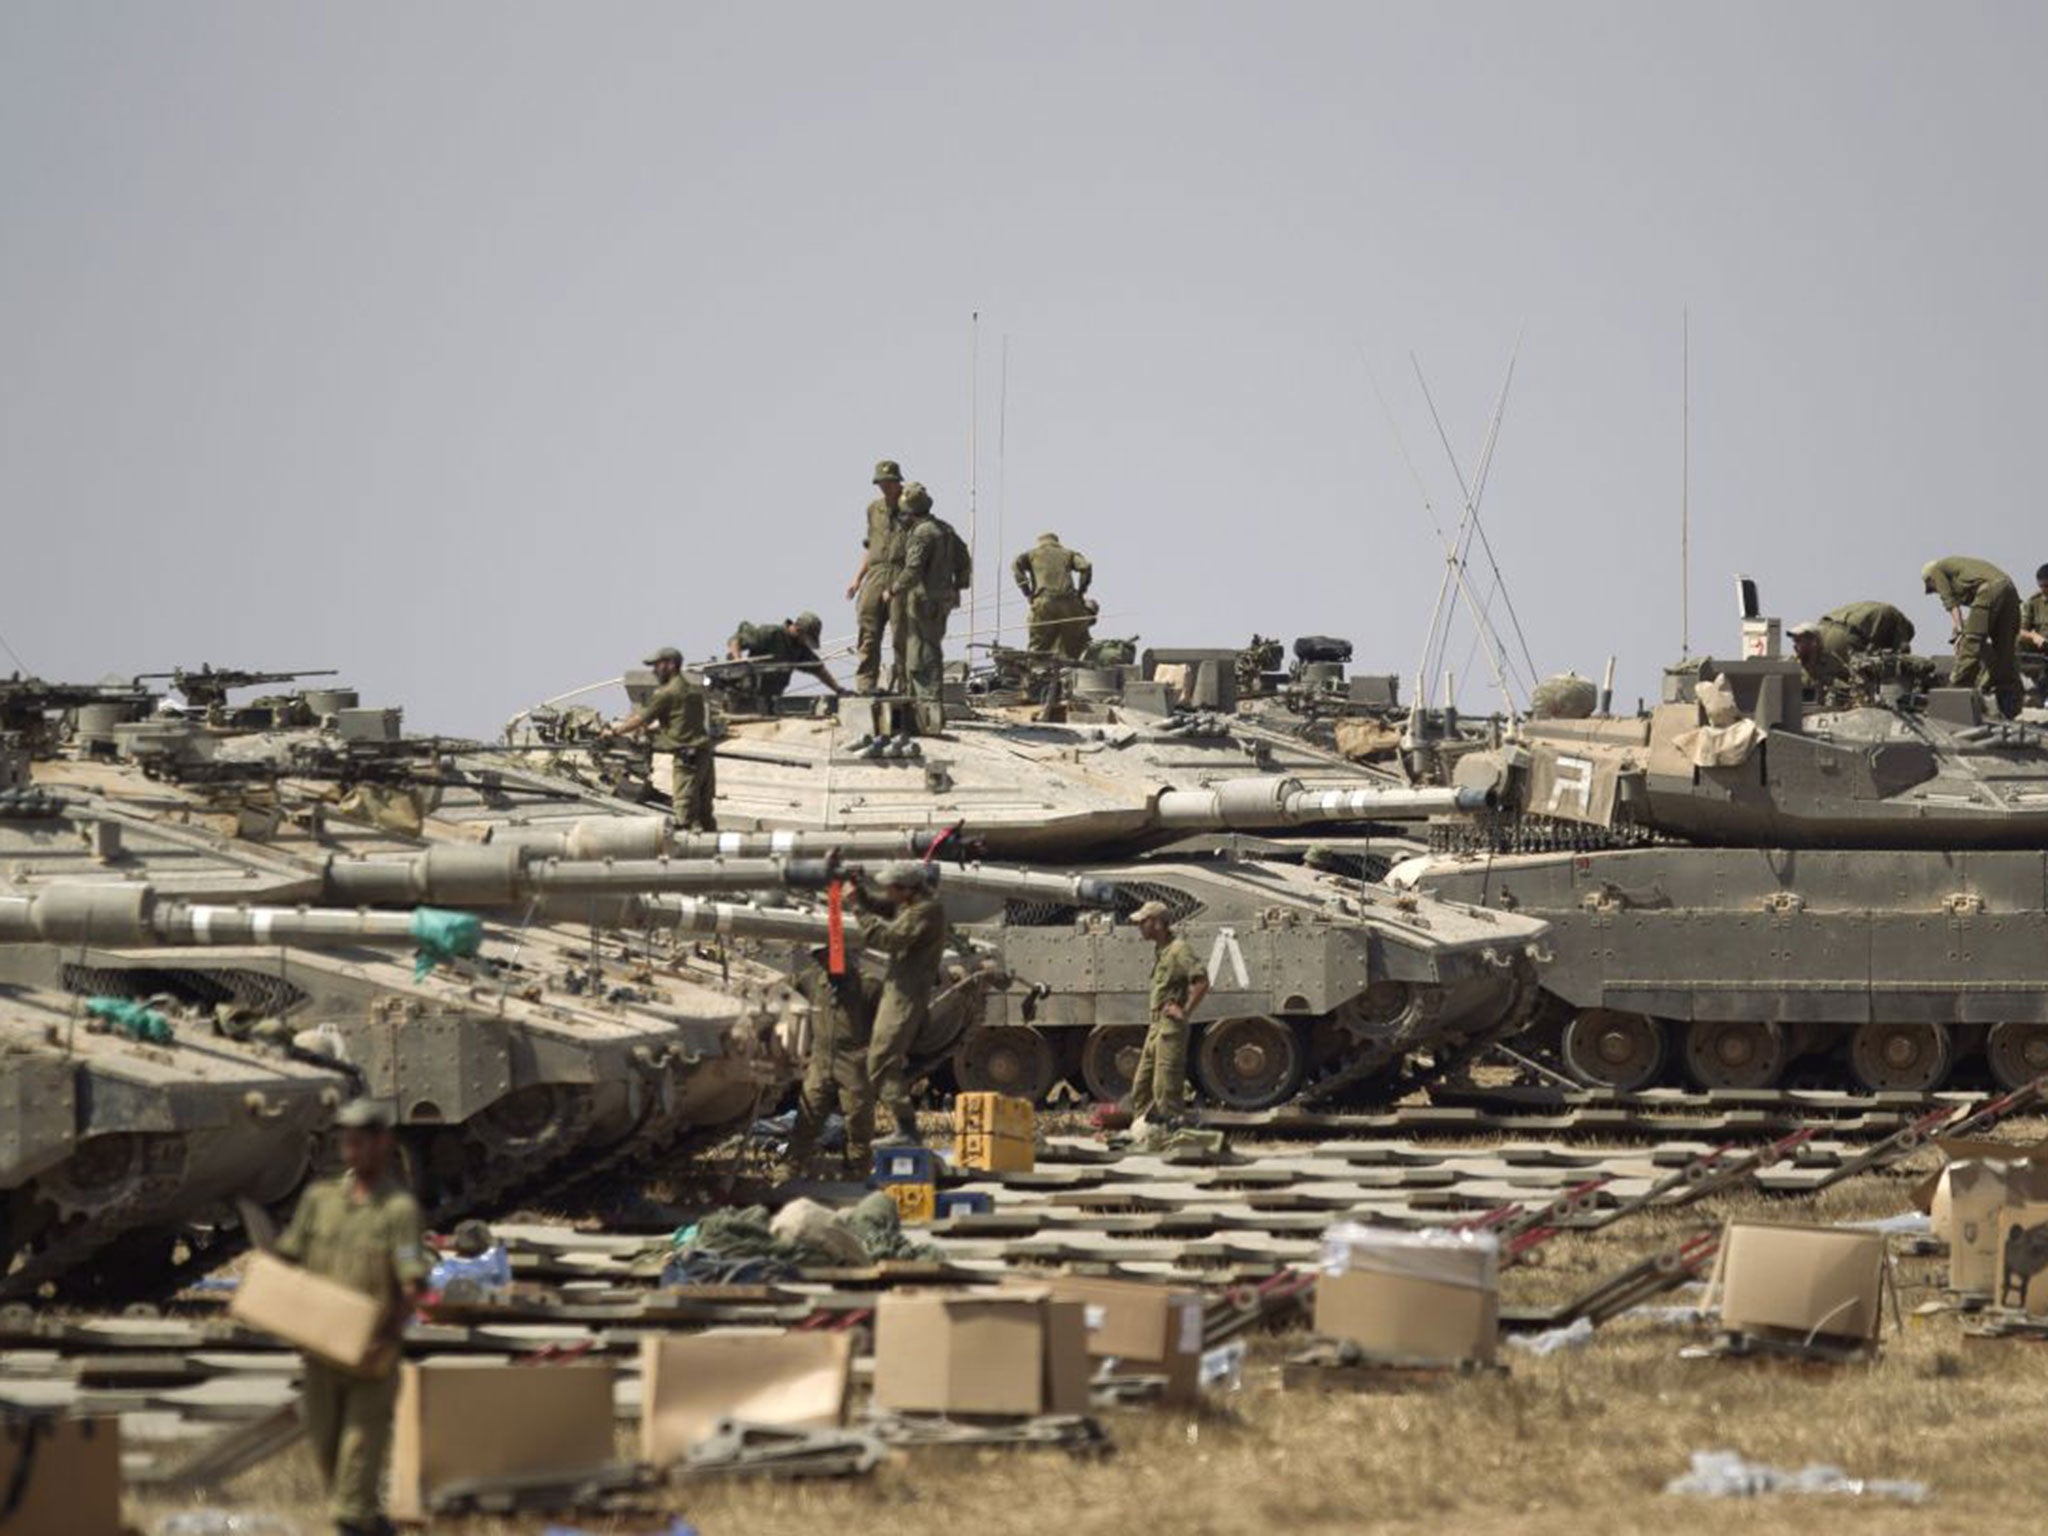 Israeli soldiers working on their tanks near the border with the Gaza Strip